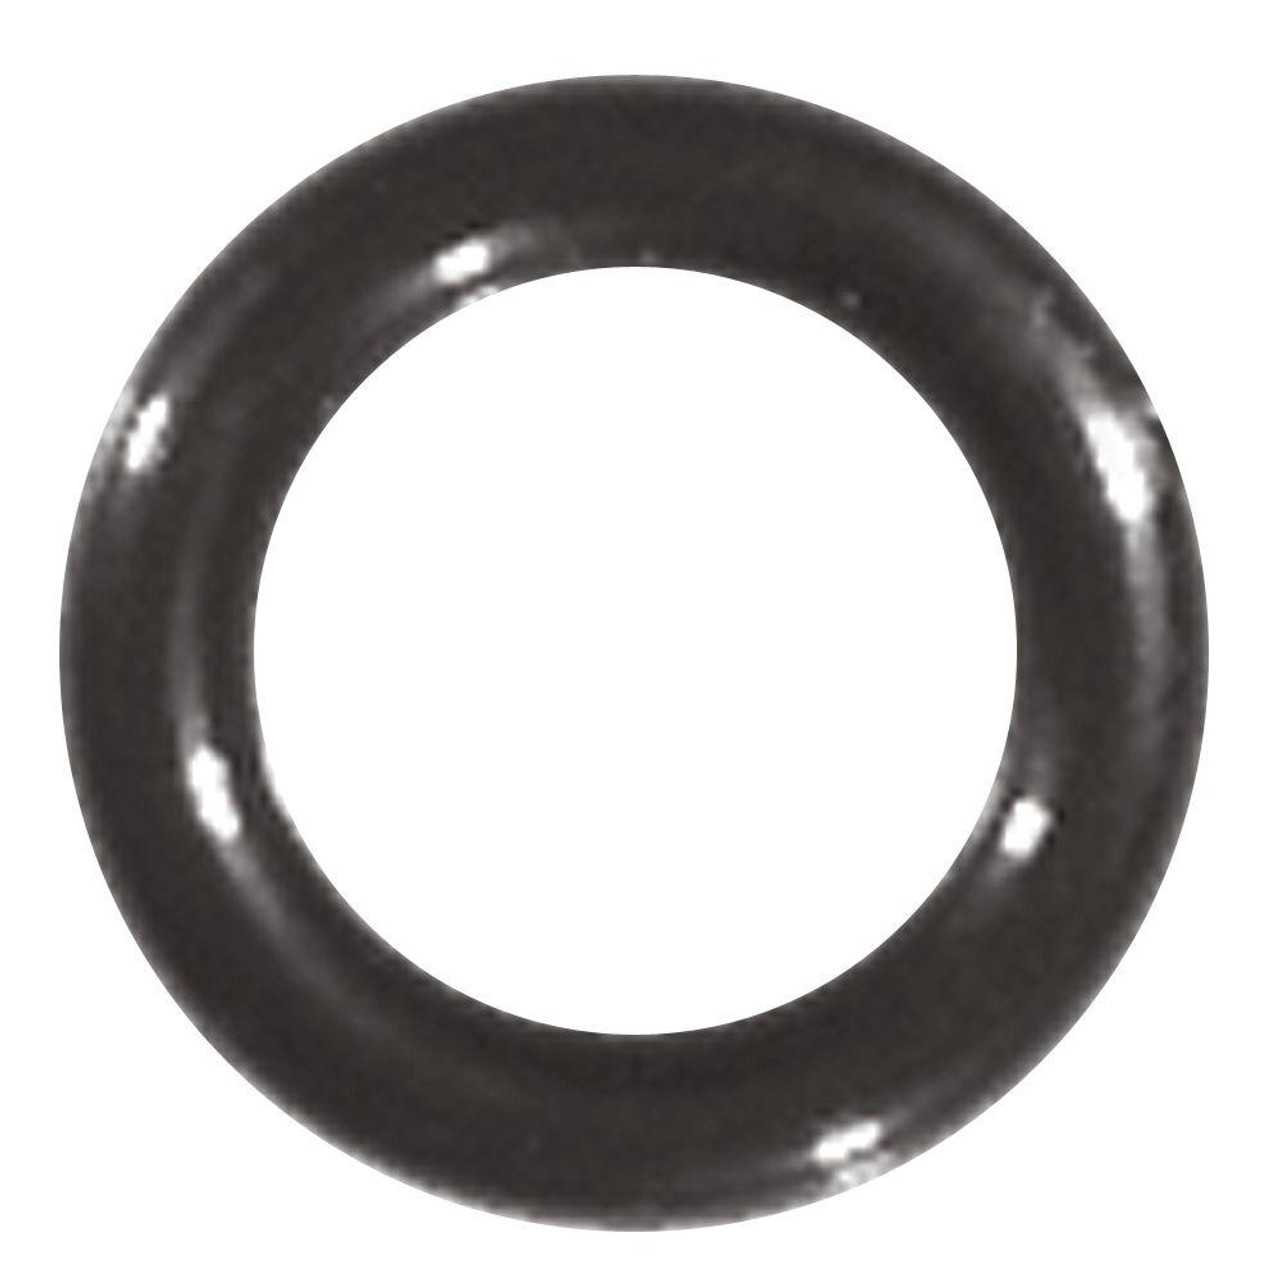 MS28778-12 O-Ring - outer diameter 3/4 - Military Fasteners